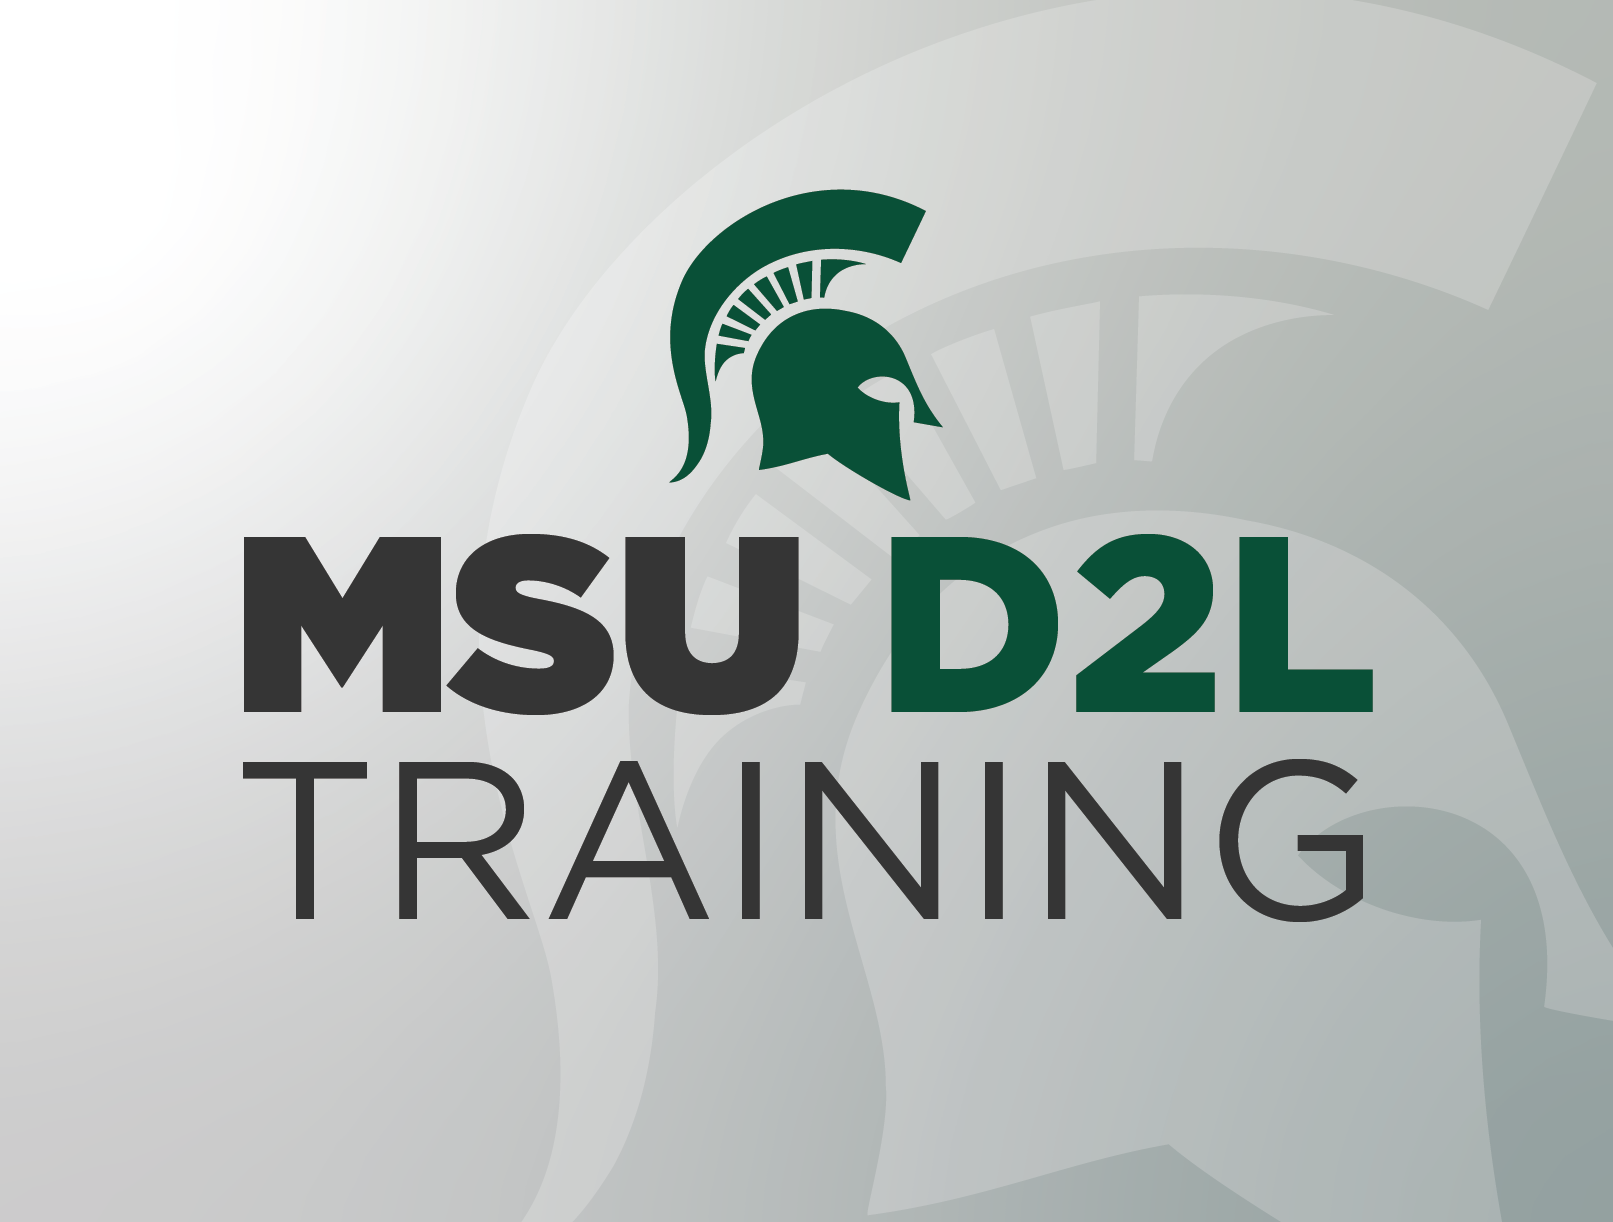 The Spartan helmet with text that reads "MSU D2L Training."